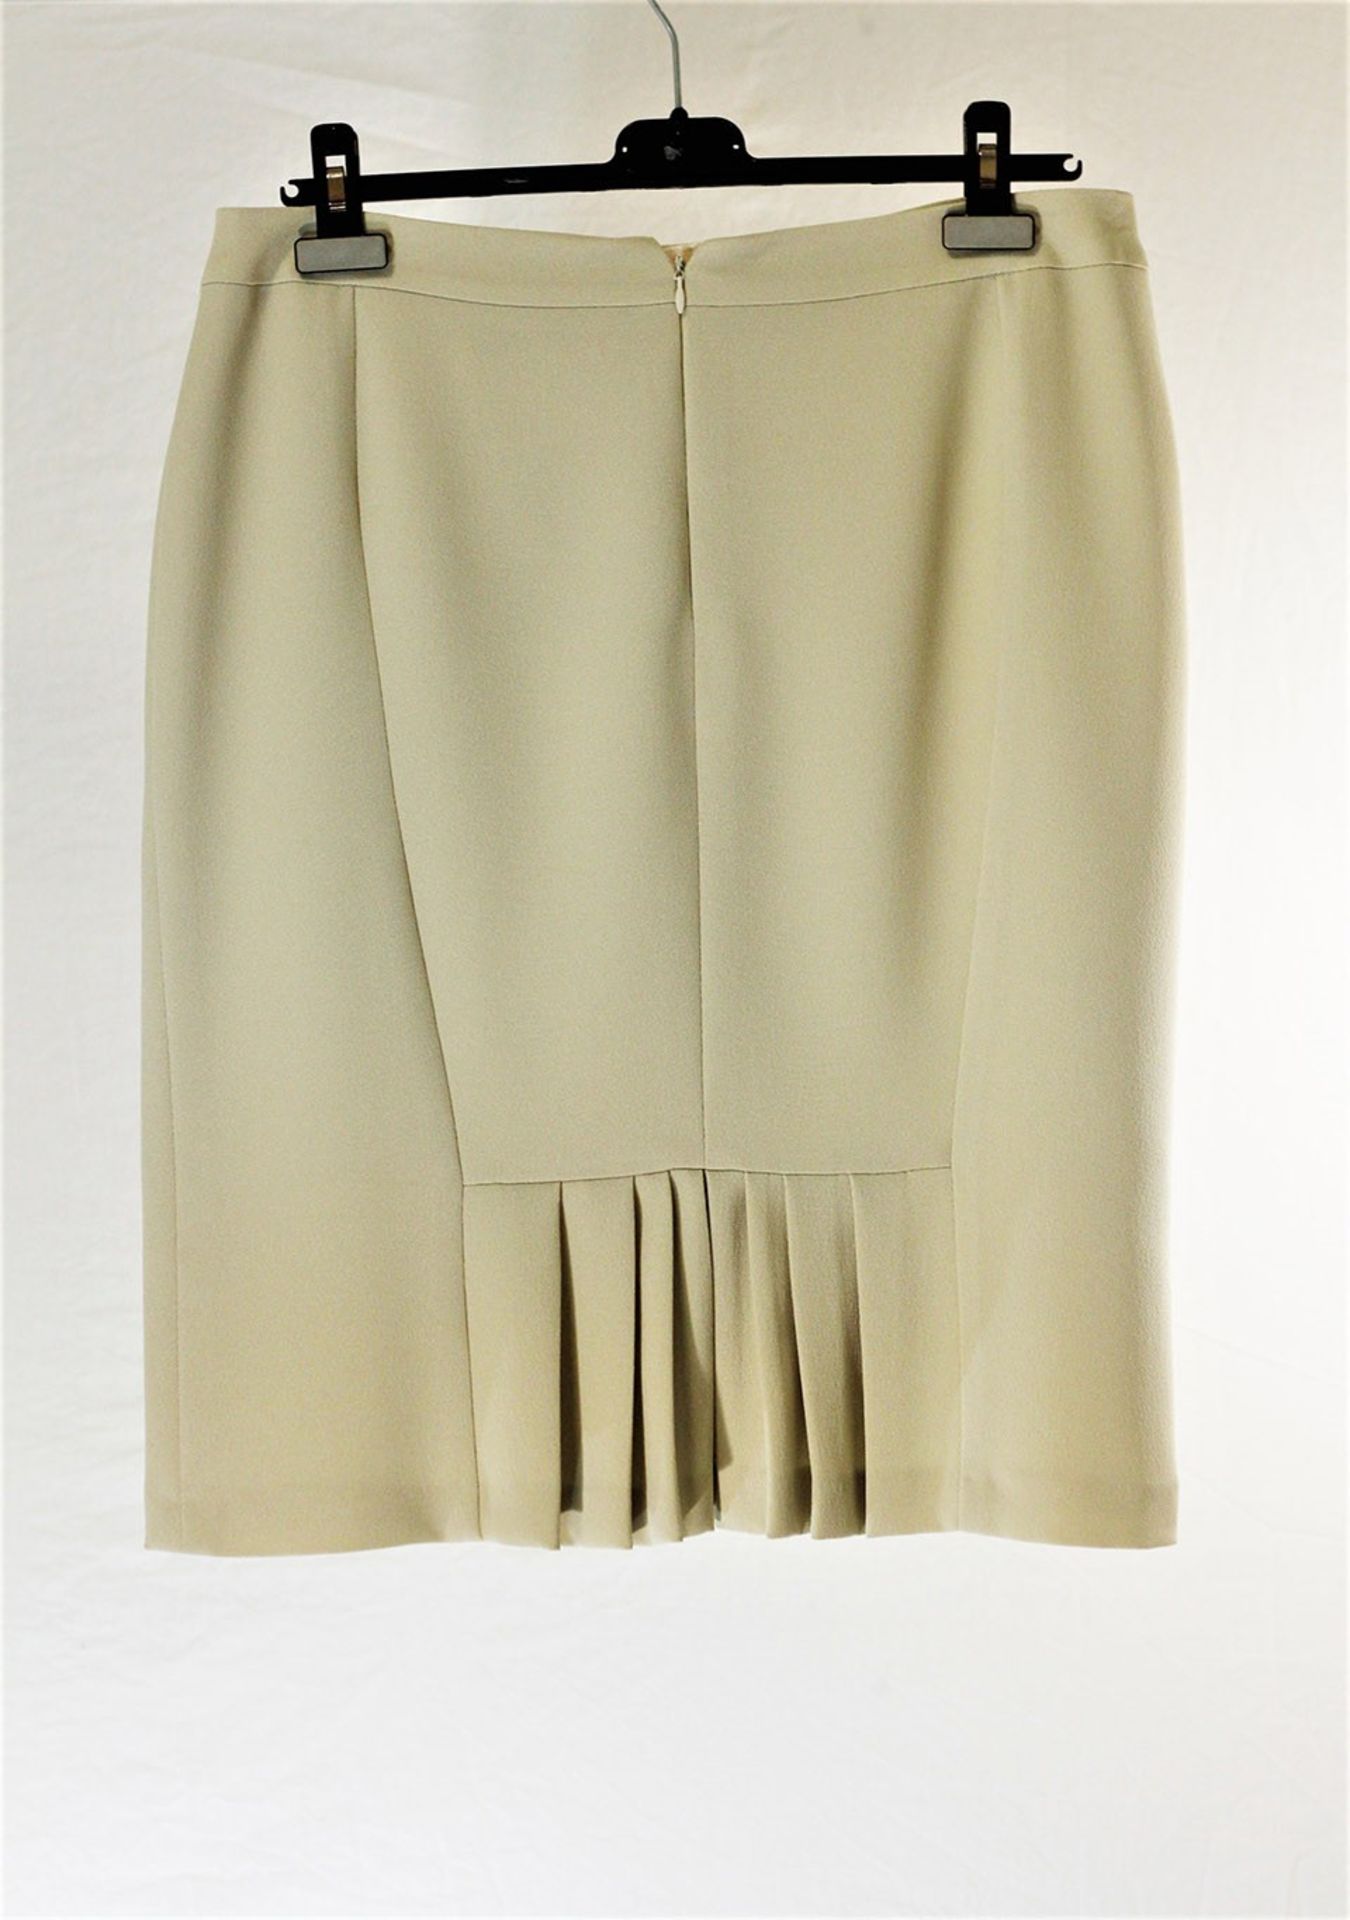 1 x Anne Belin Pistachio Skirt - Size: 16 - Material: 100% Polyester - From a High End Clothing - Image 10 of 11